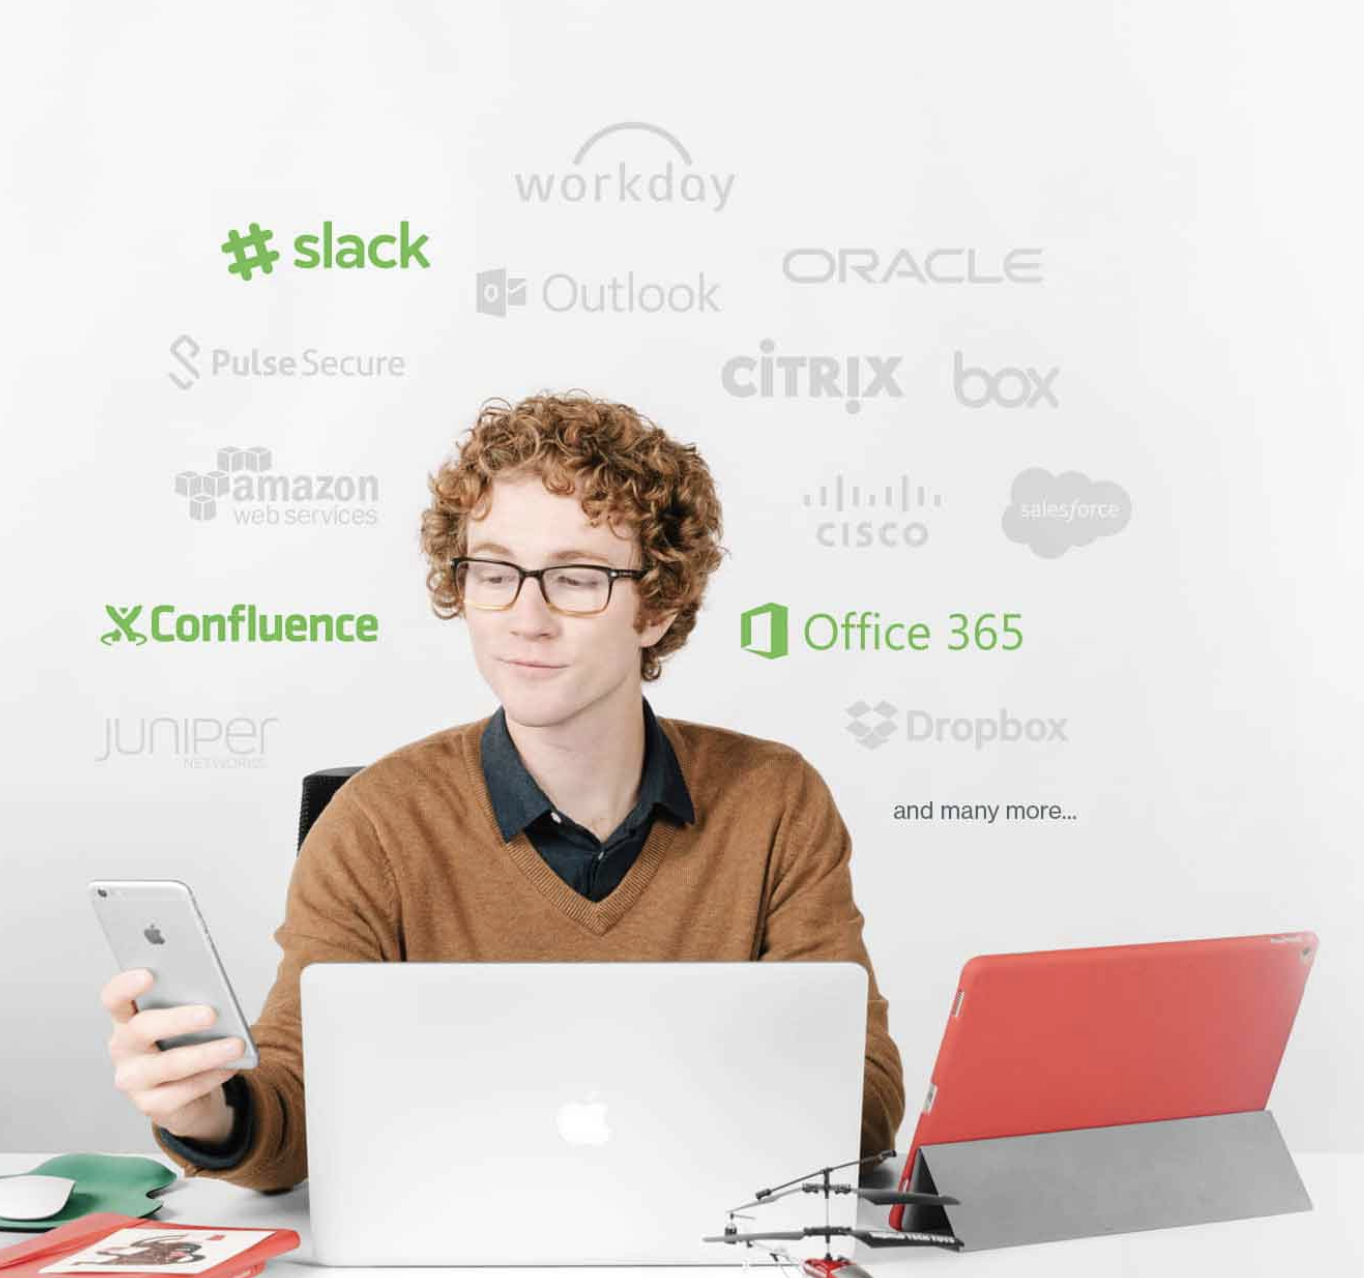 A Duo user accesses tools from tech partners like Slack, Workday, Office 365, Confluence and more through their devices.